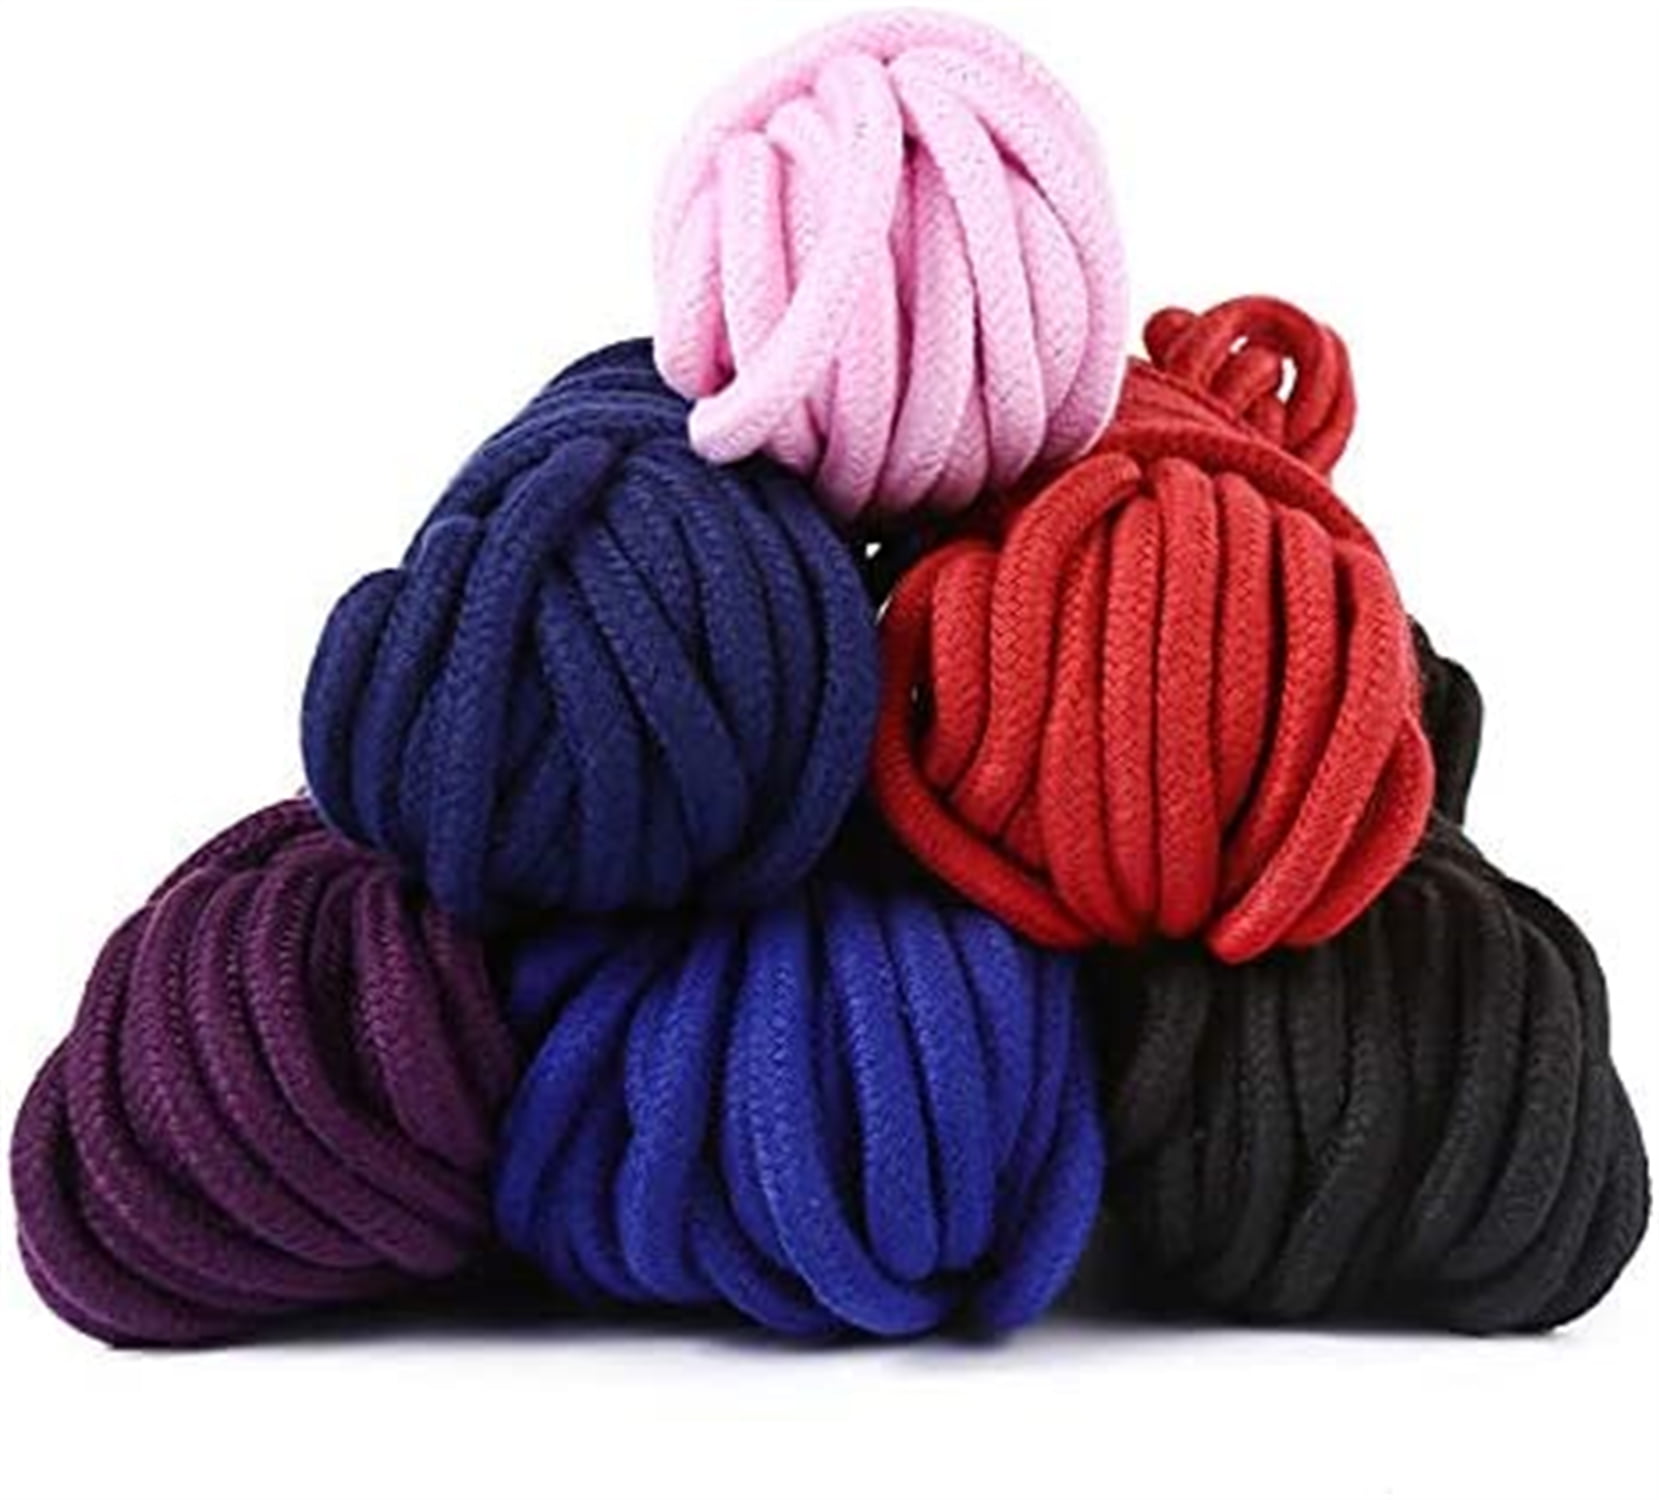 Soft Cotton Rope Extra Long - All Purpose Knot Tying Natural & Durable  Braided Cotton - Pack of 2 x 11m (36 Foot) Black and Red …